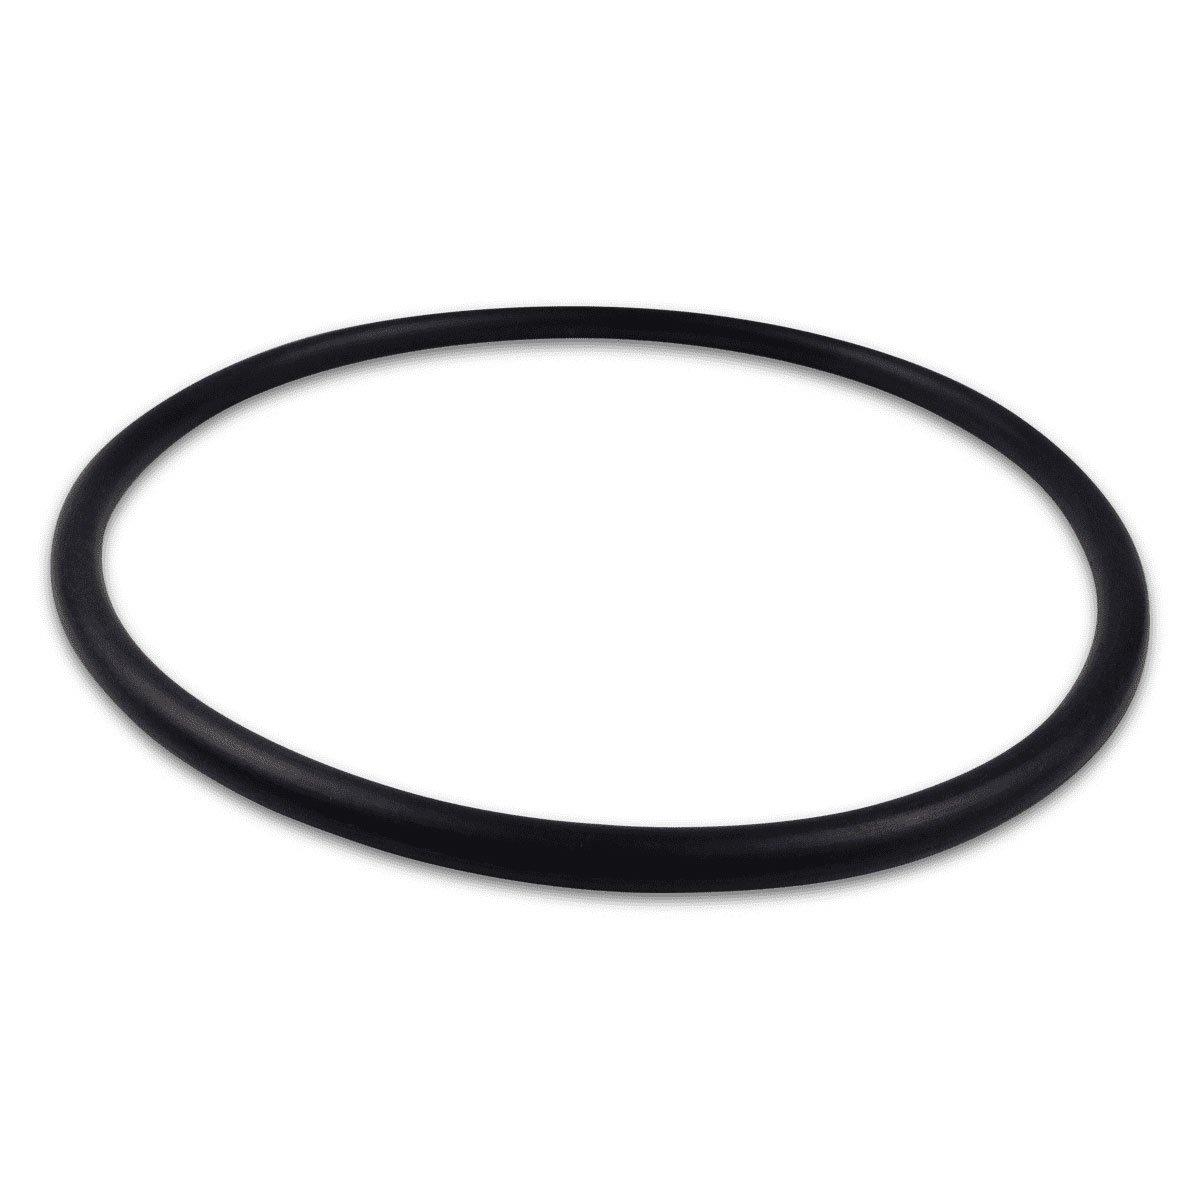 All Seals - Replacement O-Ring for Pentair 1.5" HiFlow Multiport Valve